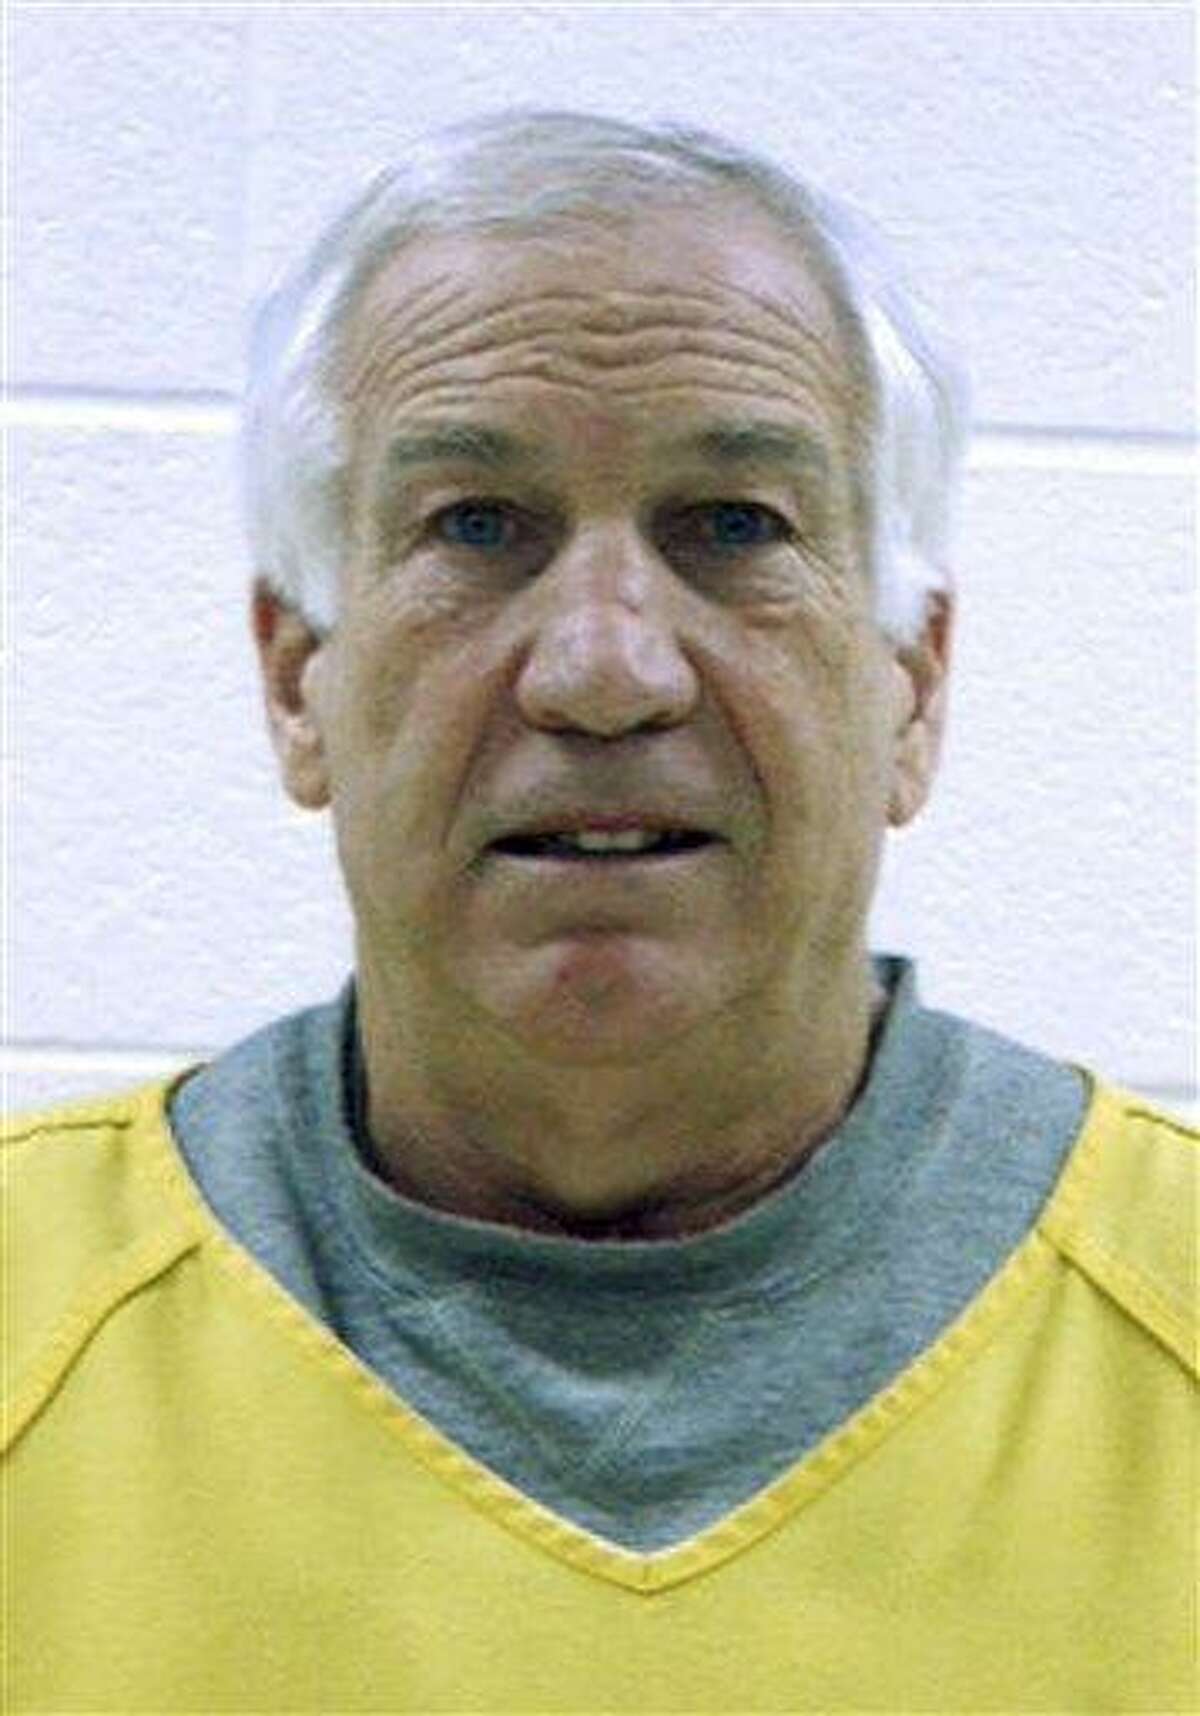 This 2011 booking photo released by the Centre County Correctional Facility in Bellefonte, Penn., shows former Penn State football defensive coordinator Gerald "Jerry" Sandusky, who was arrested and arraigned on sex abuse charges. Associated Press